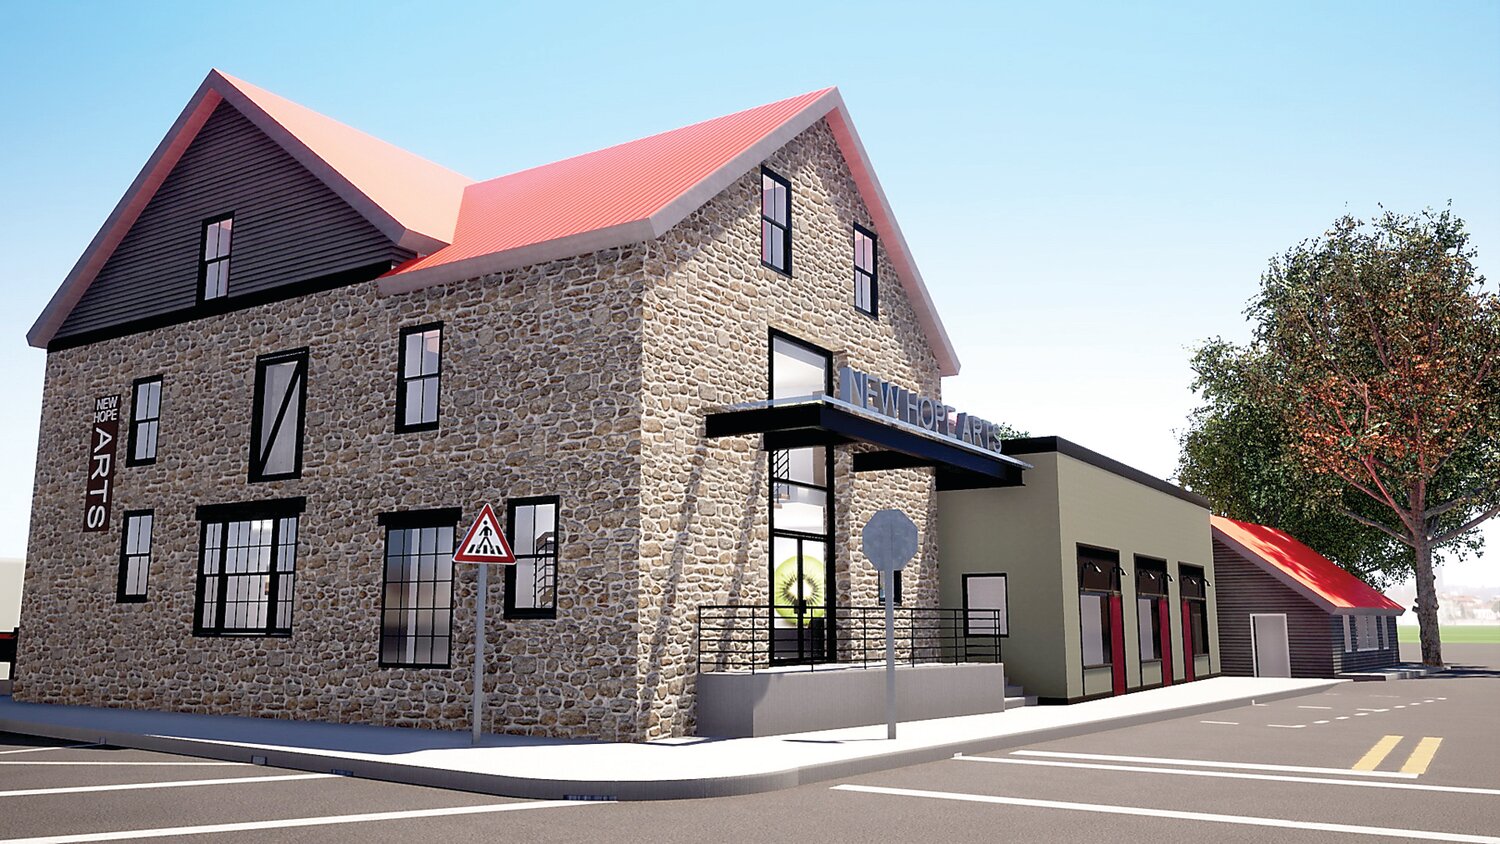 A rendering of the New Hope Arts building.